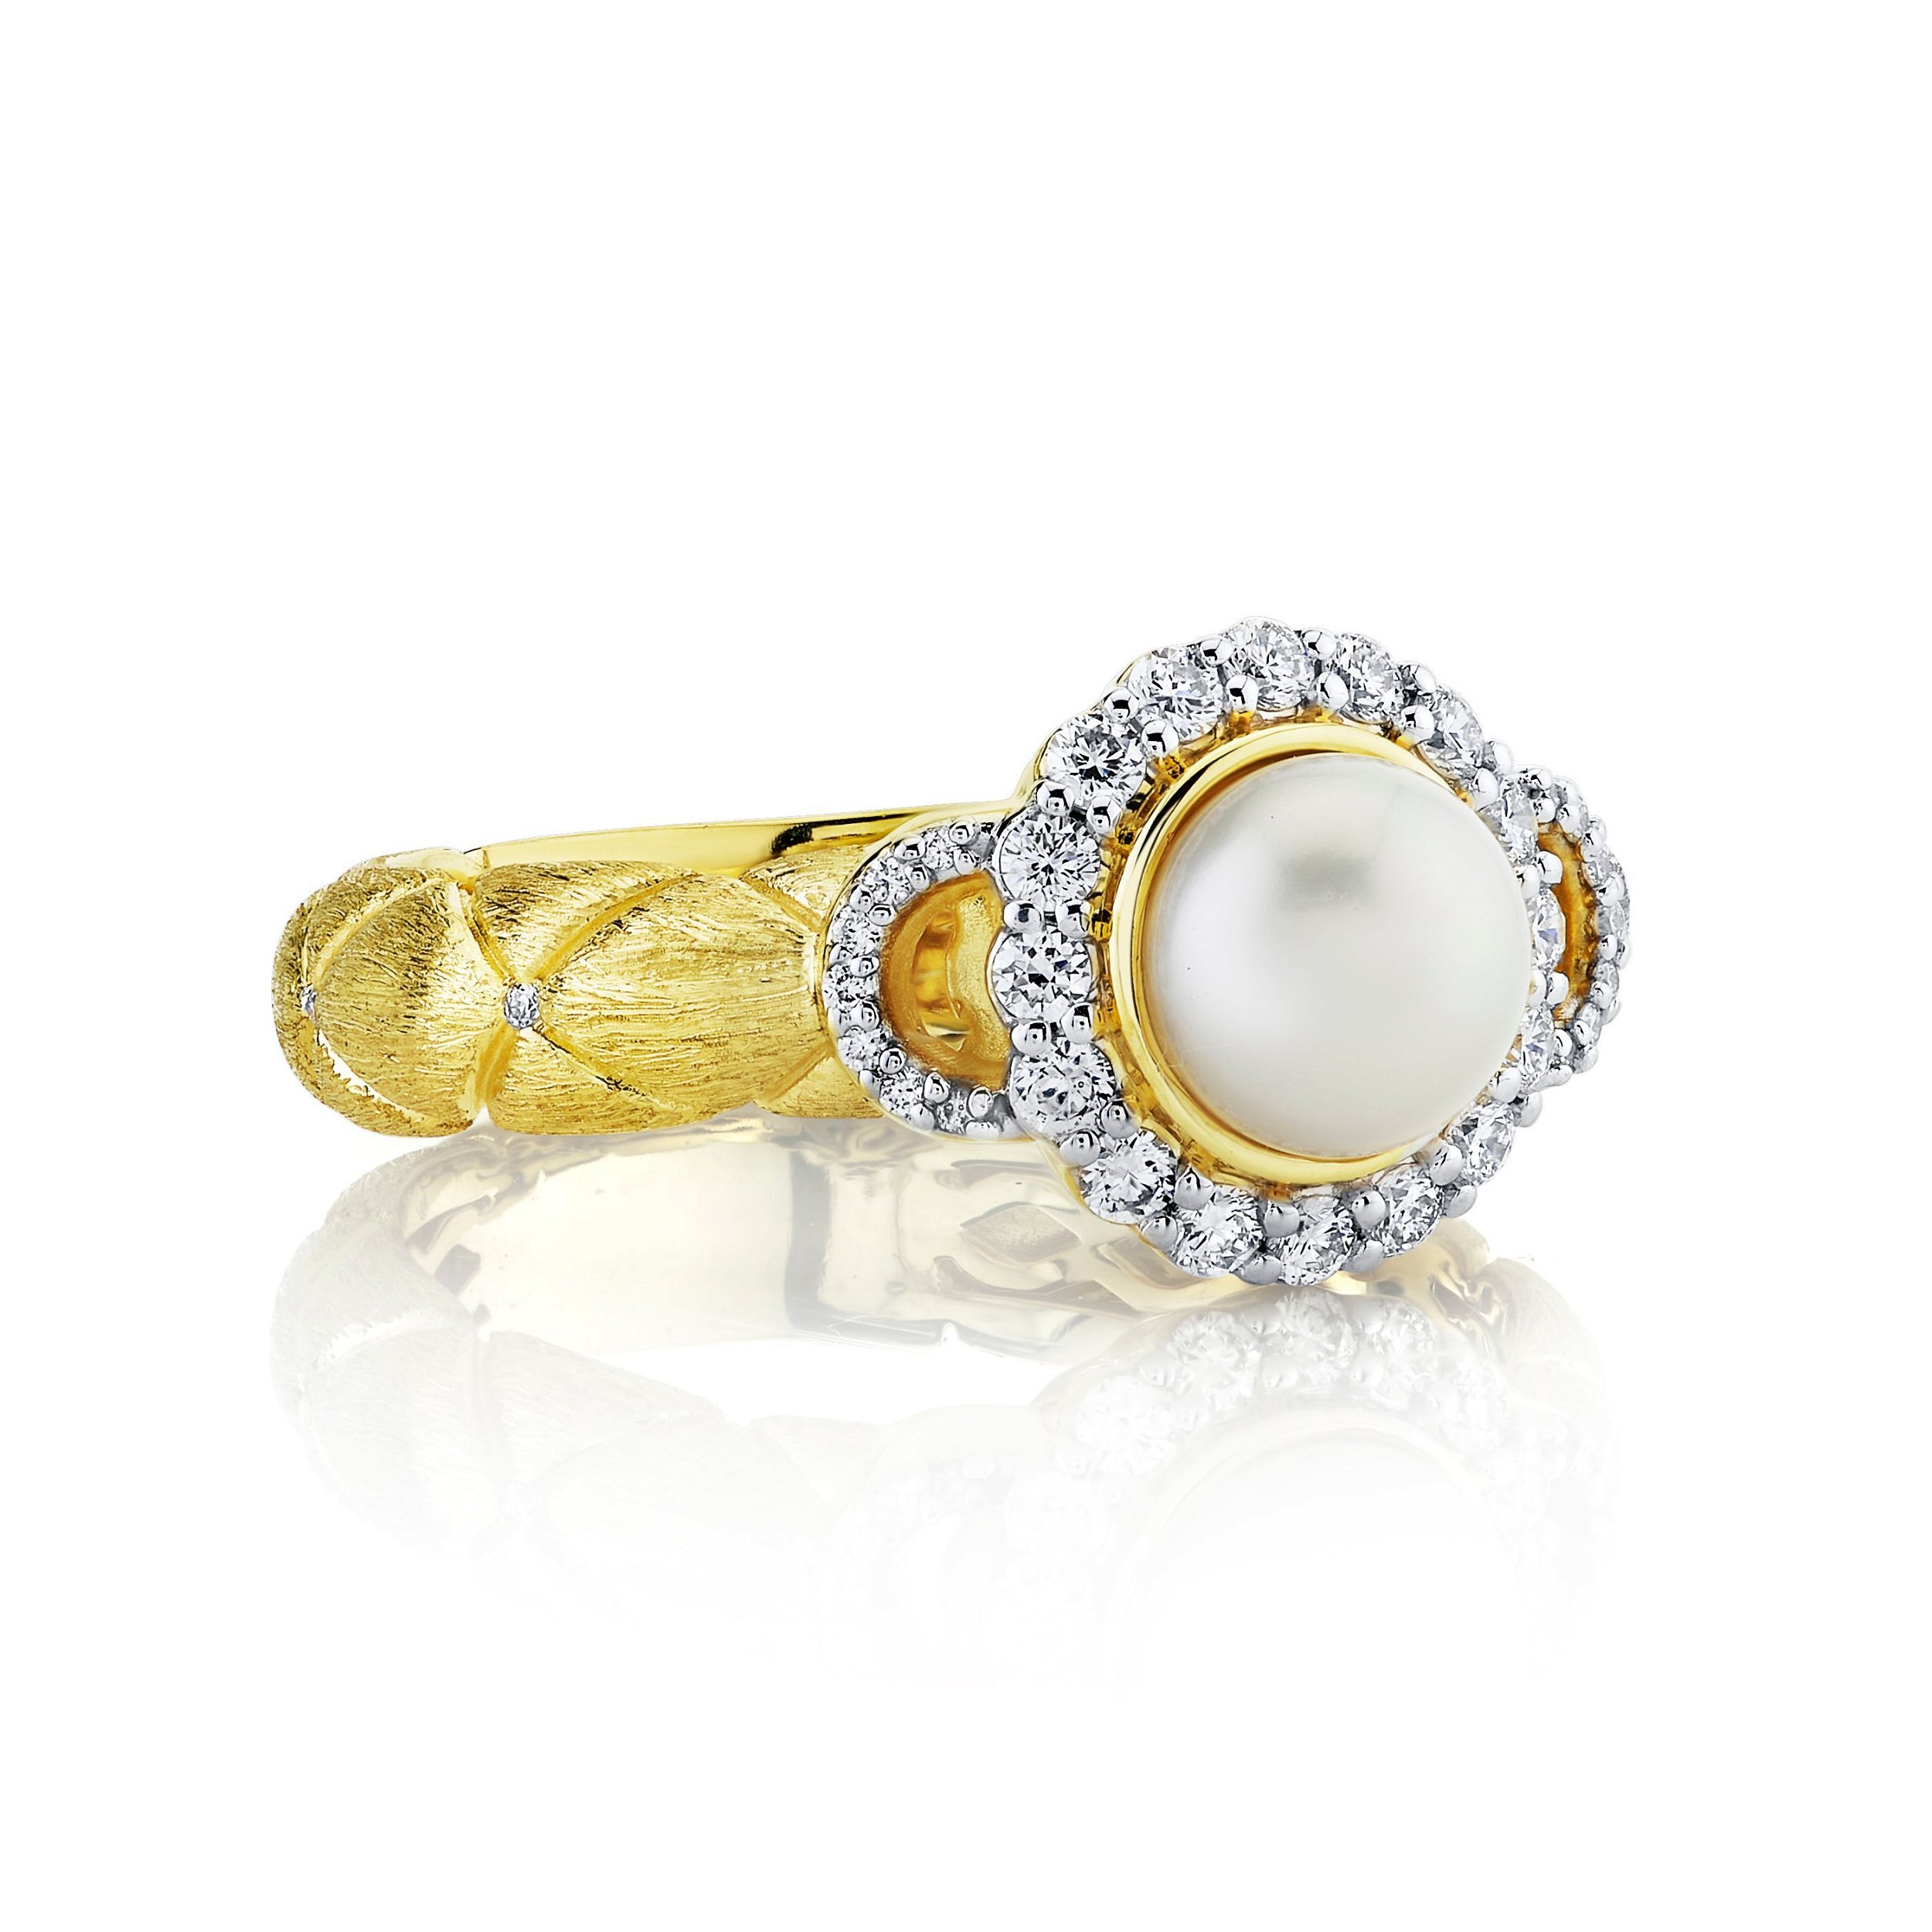 T PEARL RING WITH QUILTED SHANK AND WHITE DIAMOND DETAIL